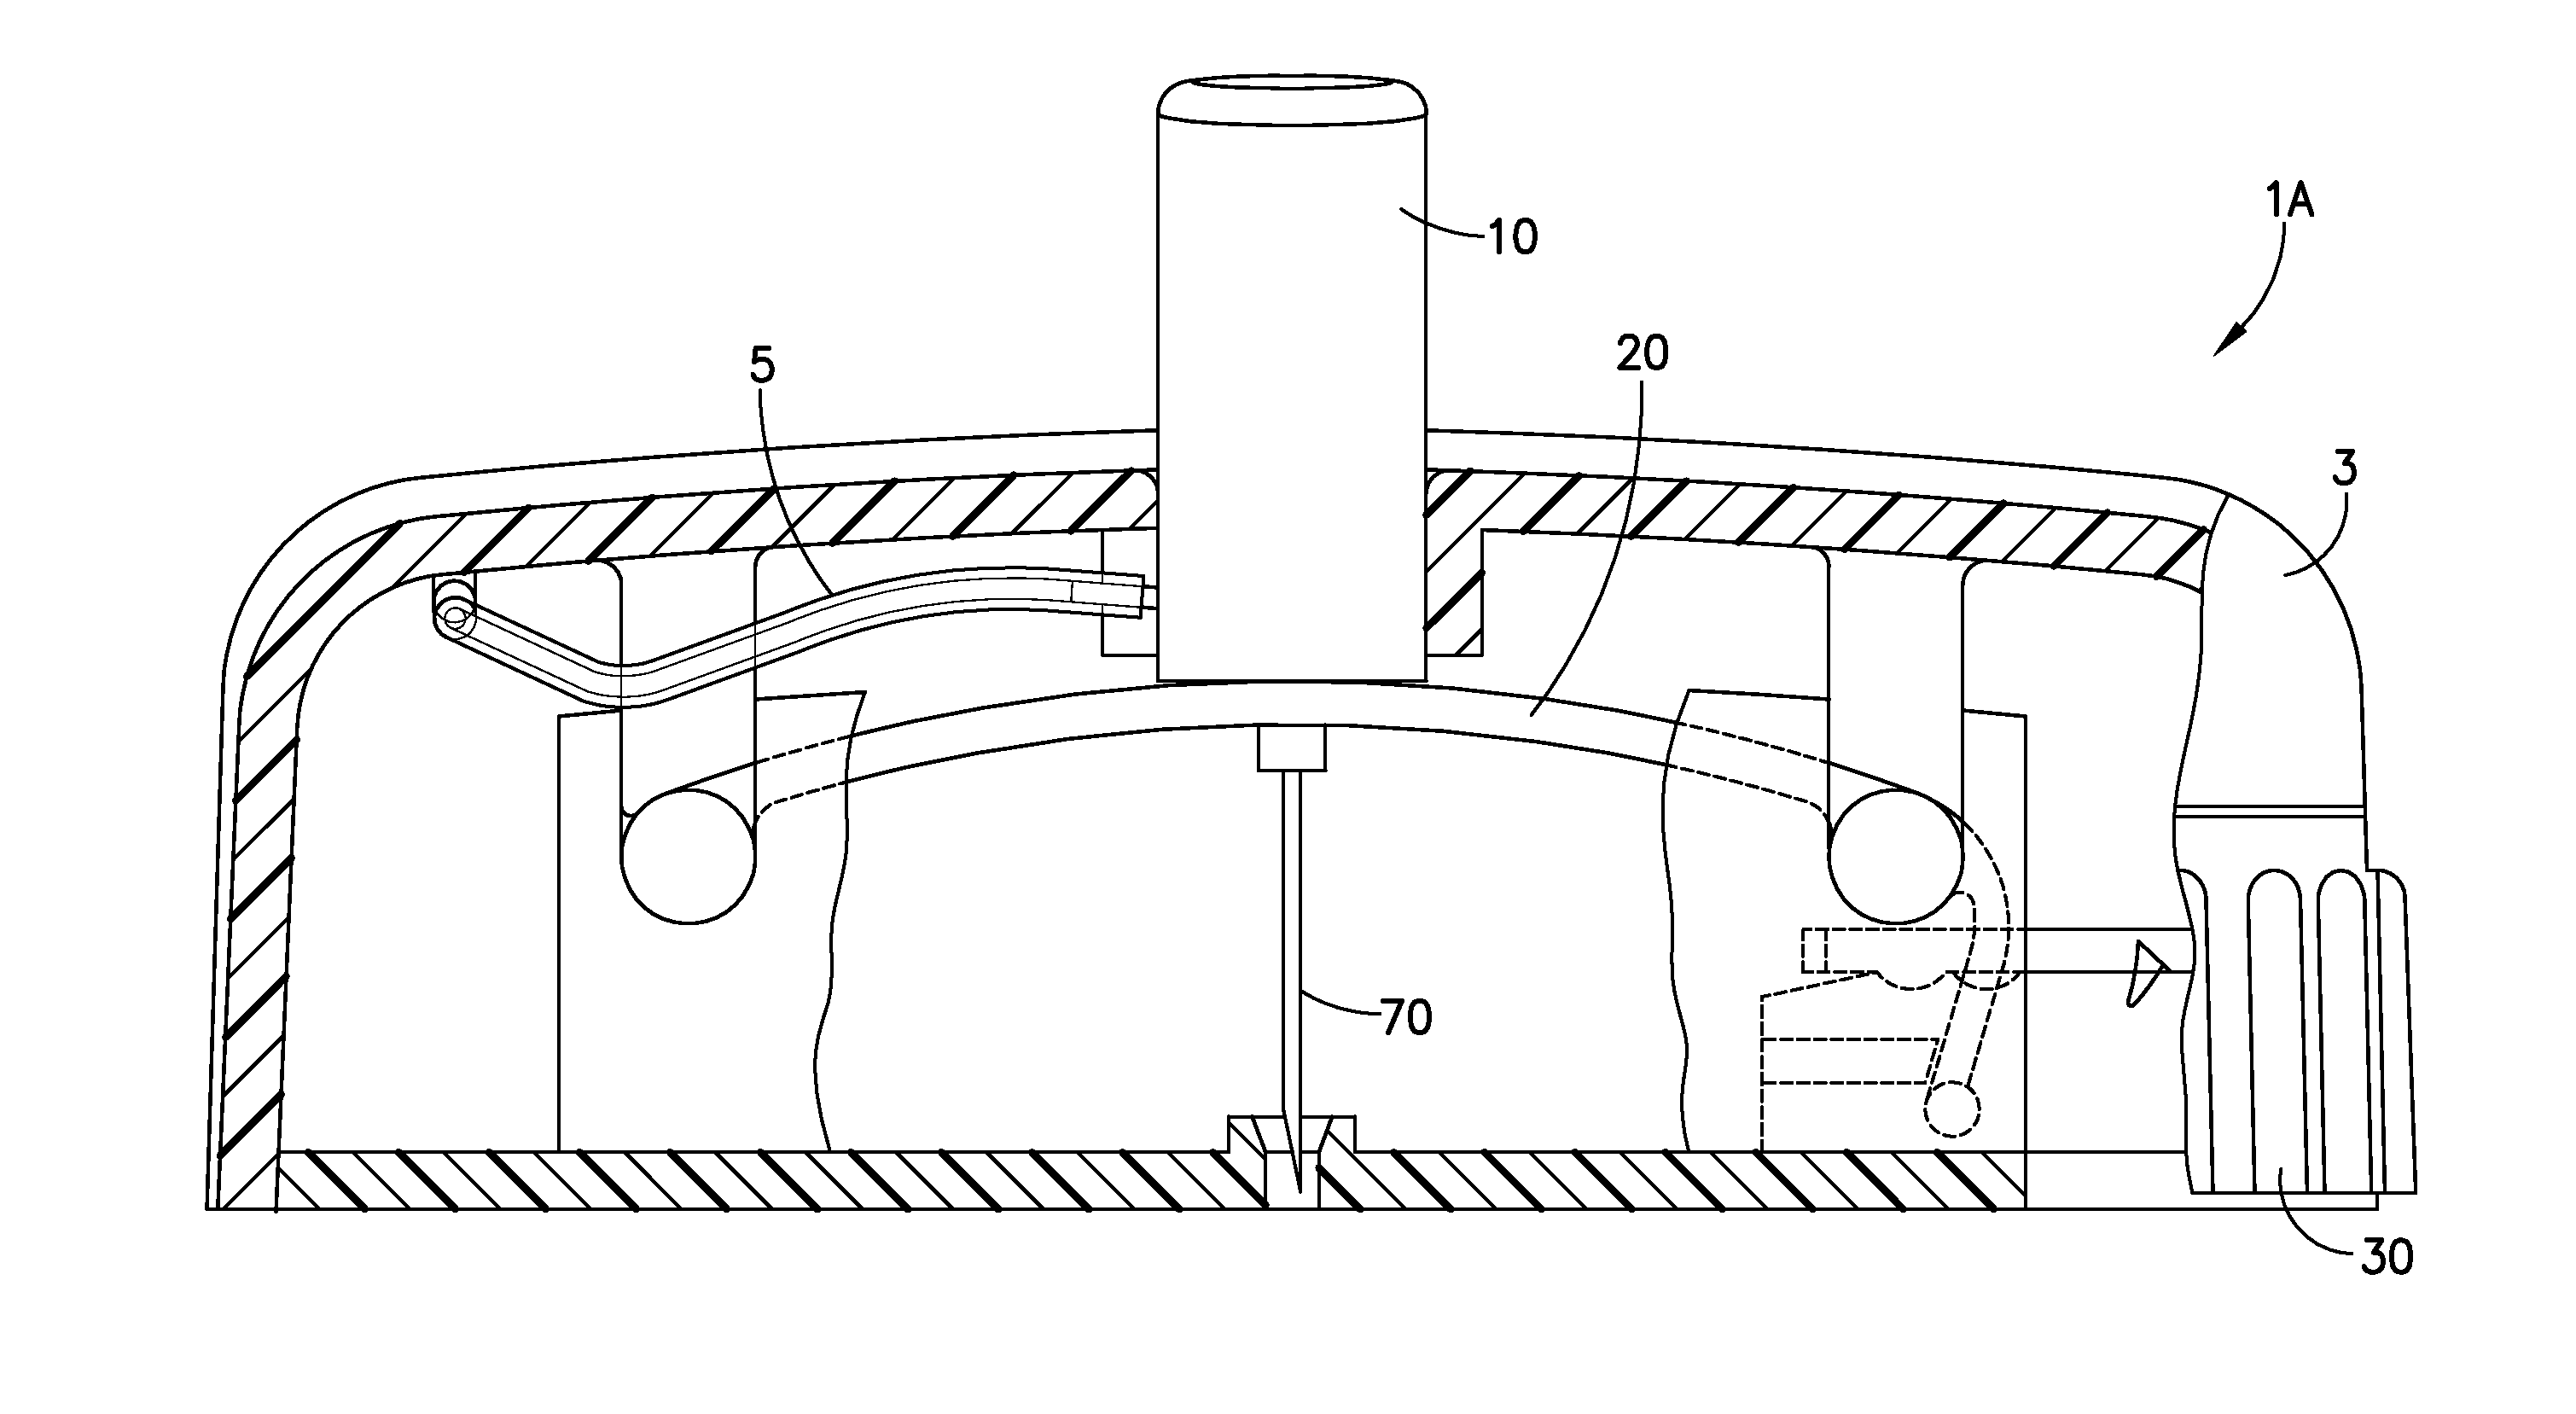 Cannula Insertion and Retraction Device for Infusion Device